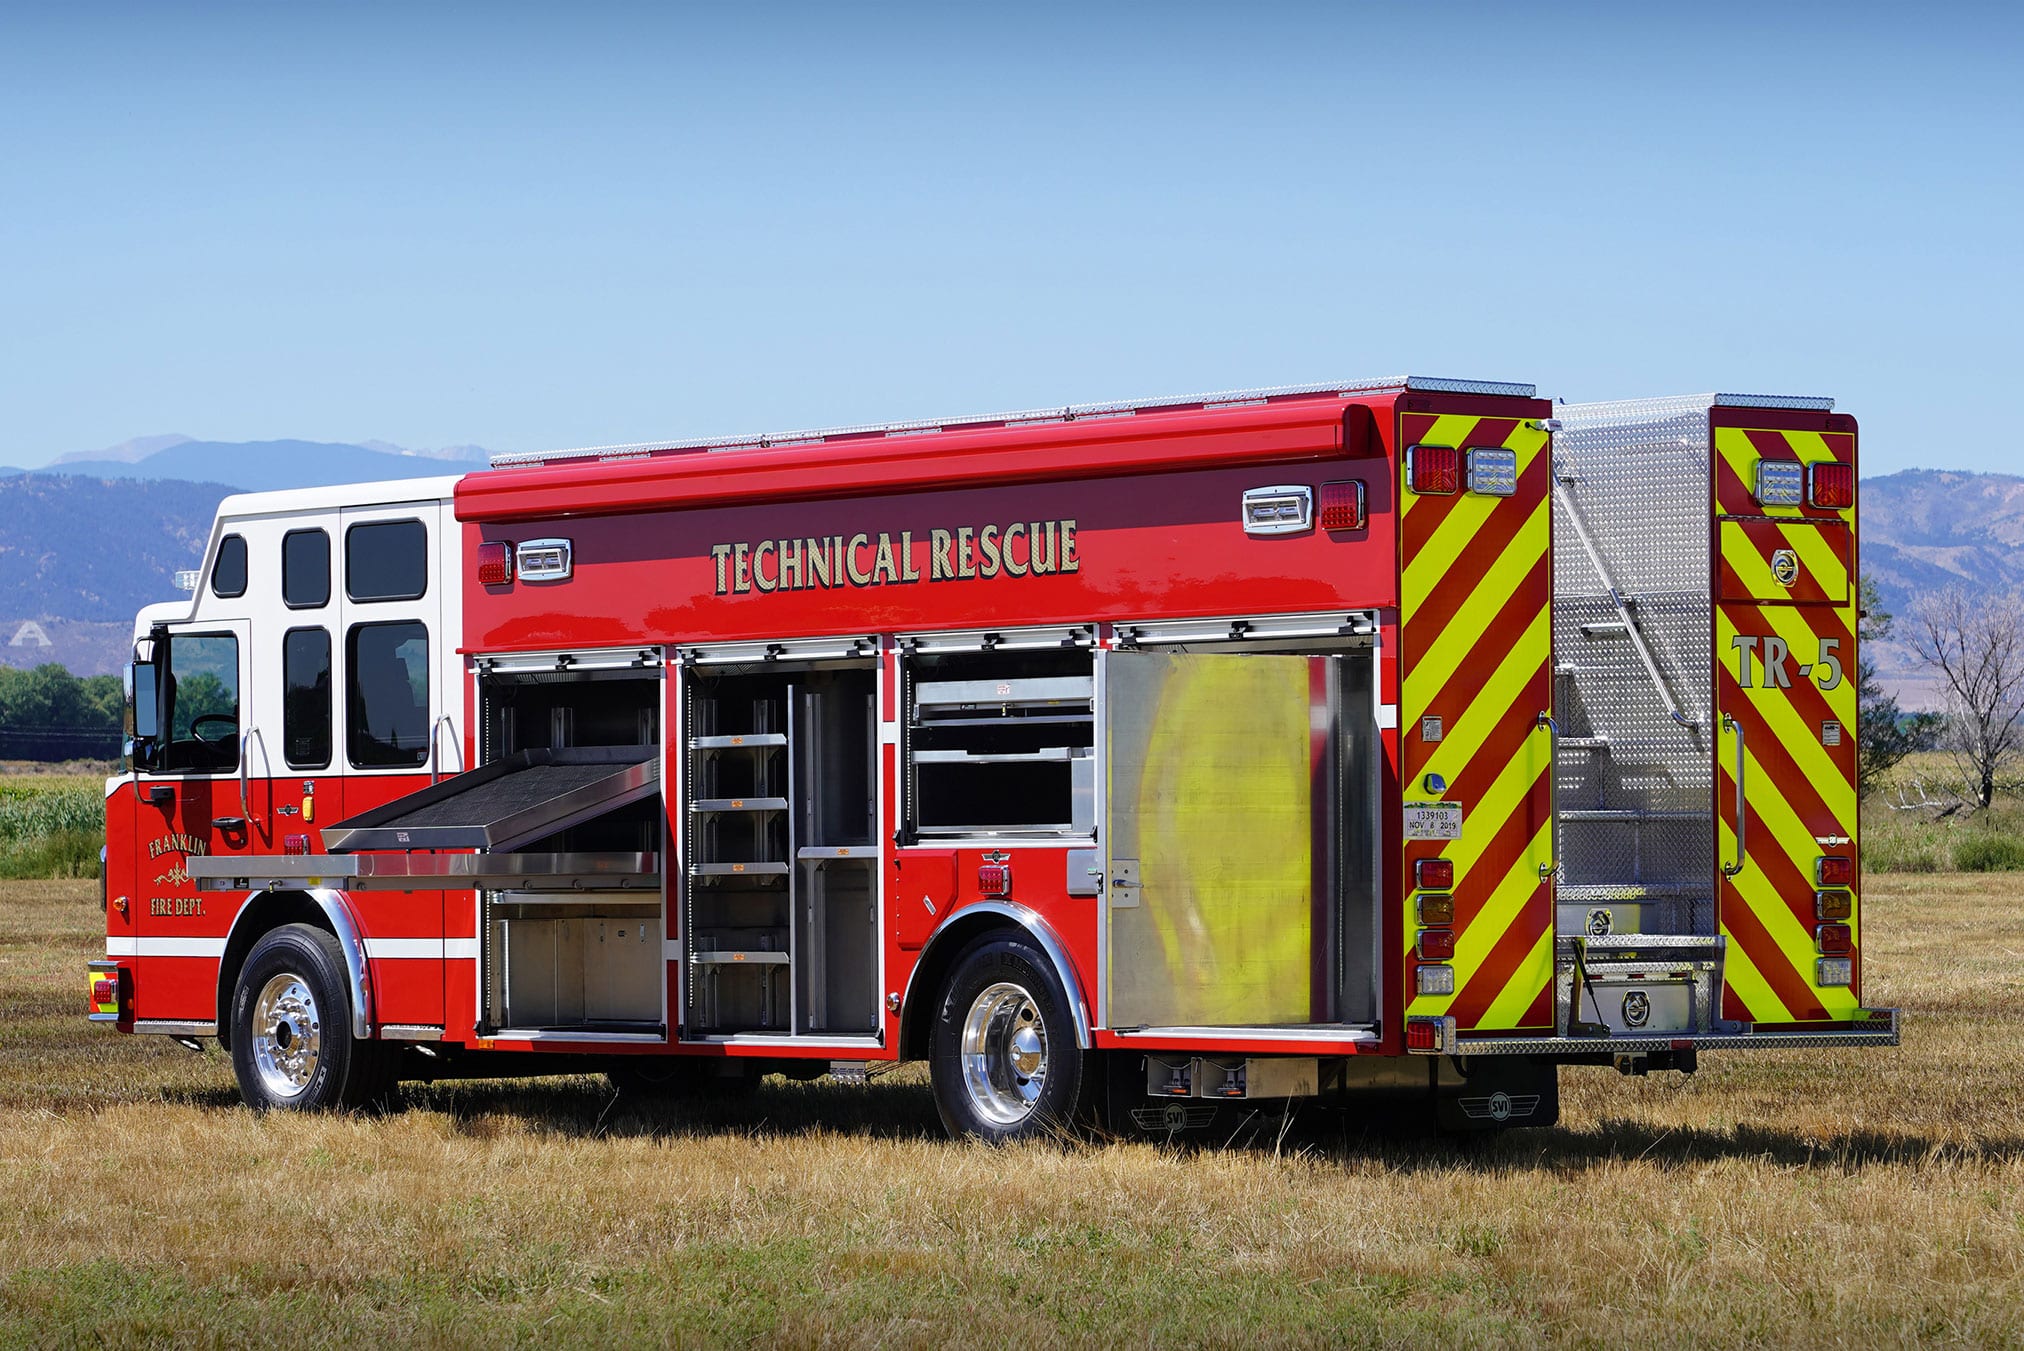 Featured image for “Franklin, TN Fire Department – Technical Rescue #1100”